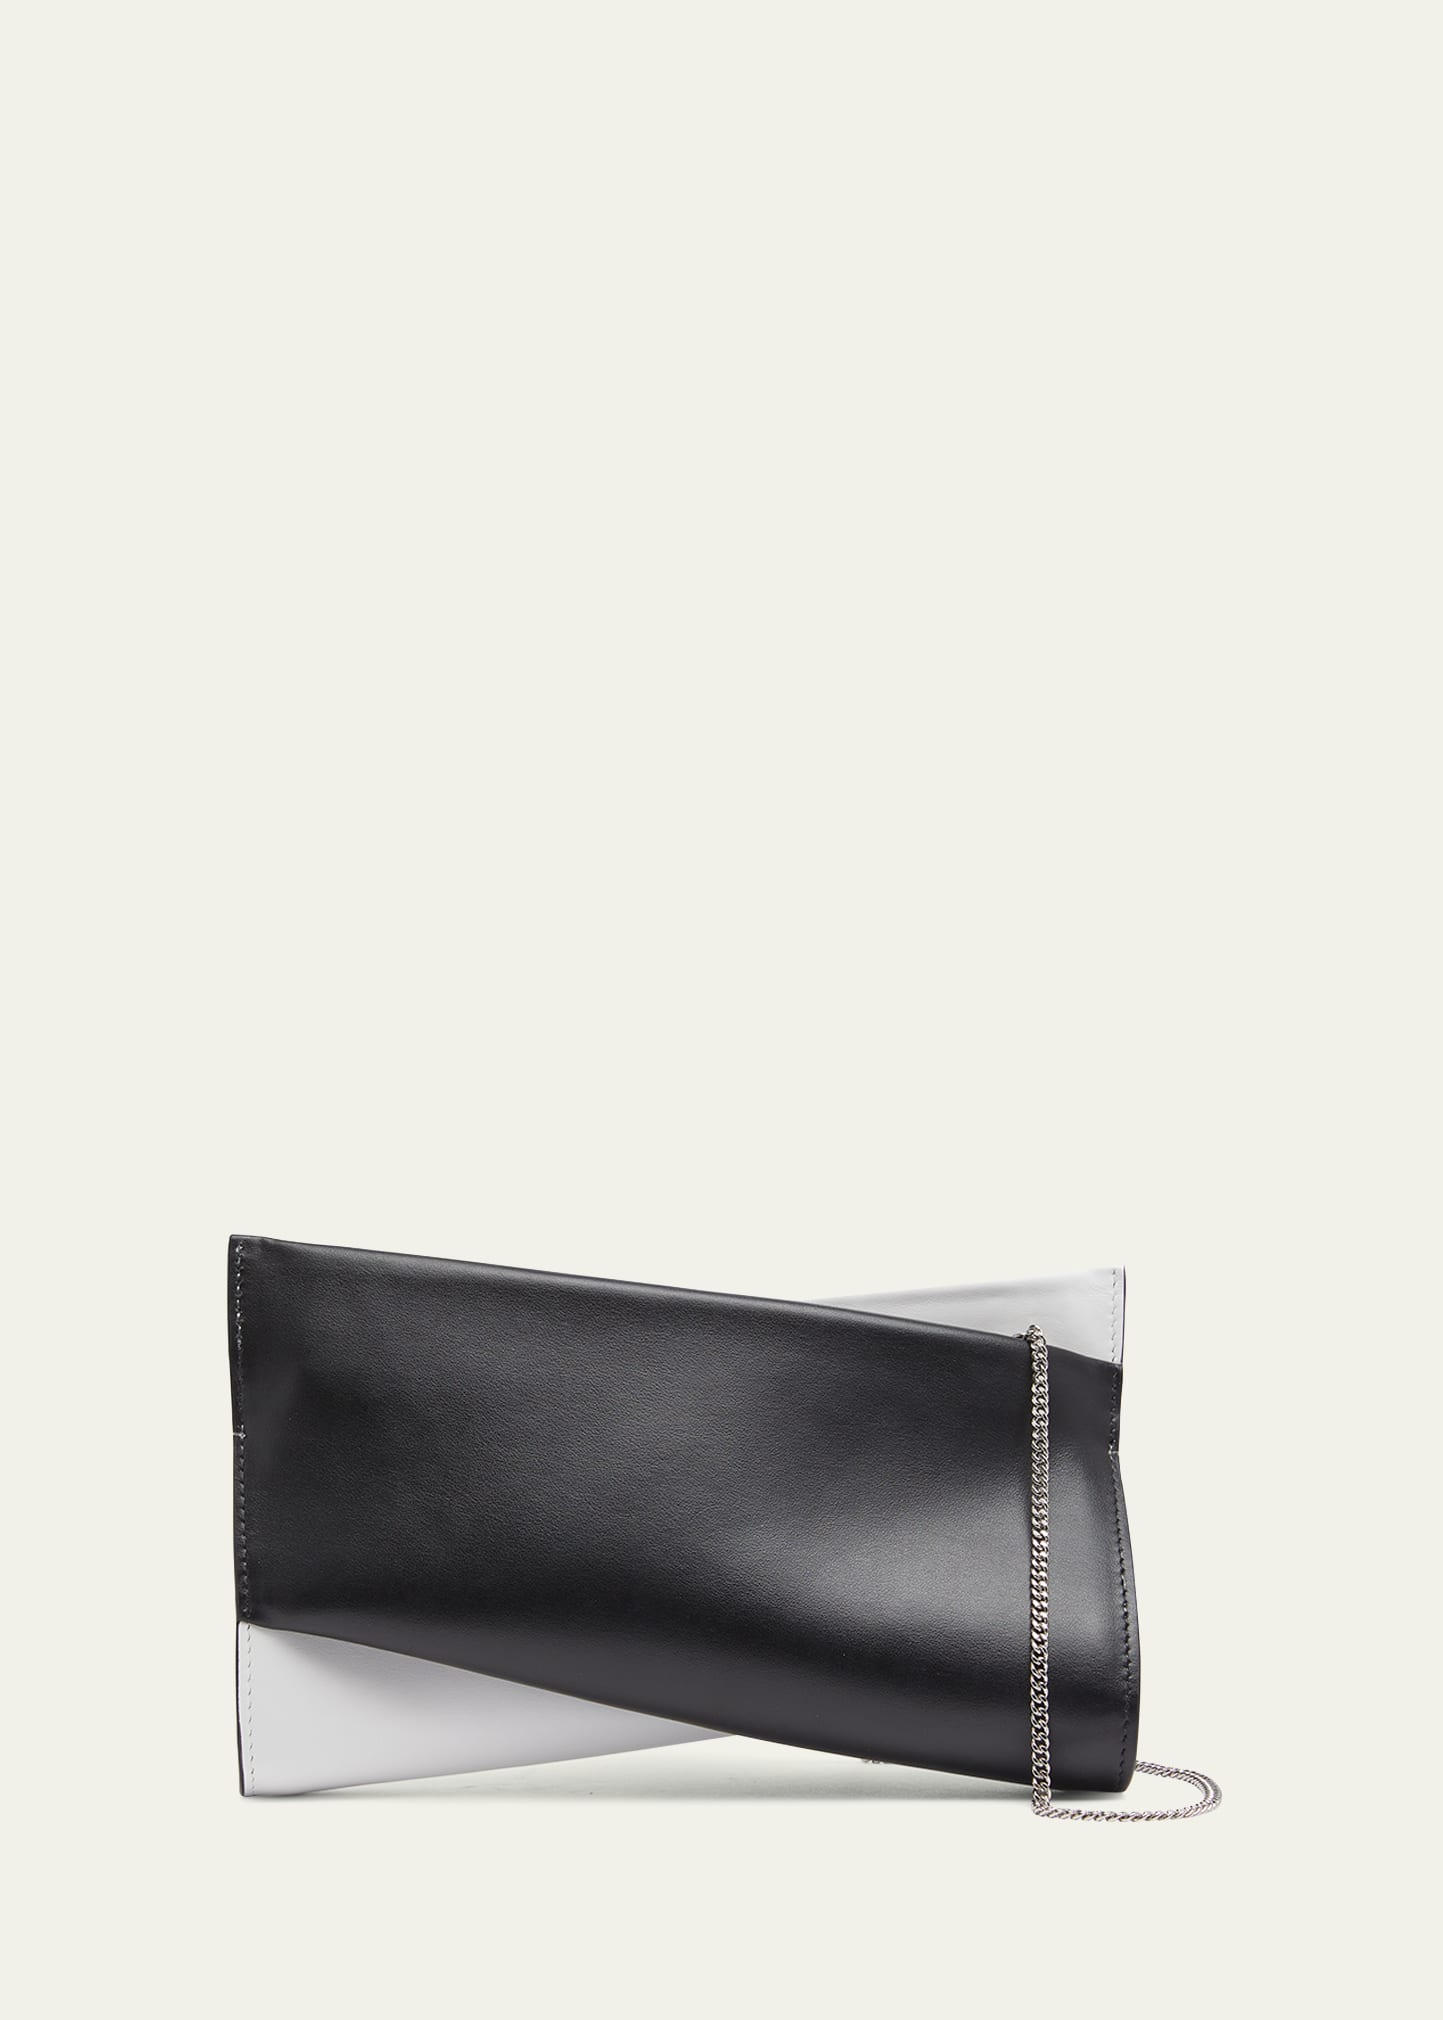 Loubitwist Small Bicolor Leather Clutch Bag